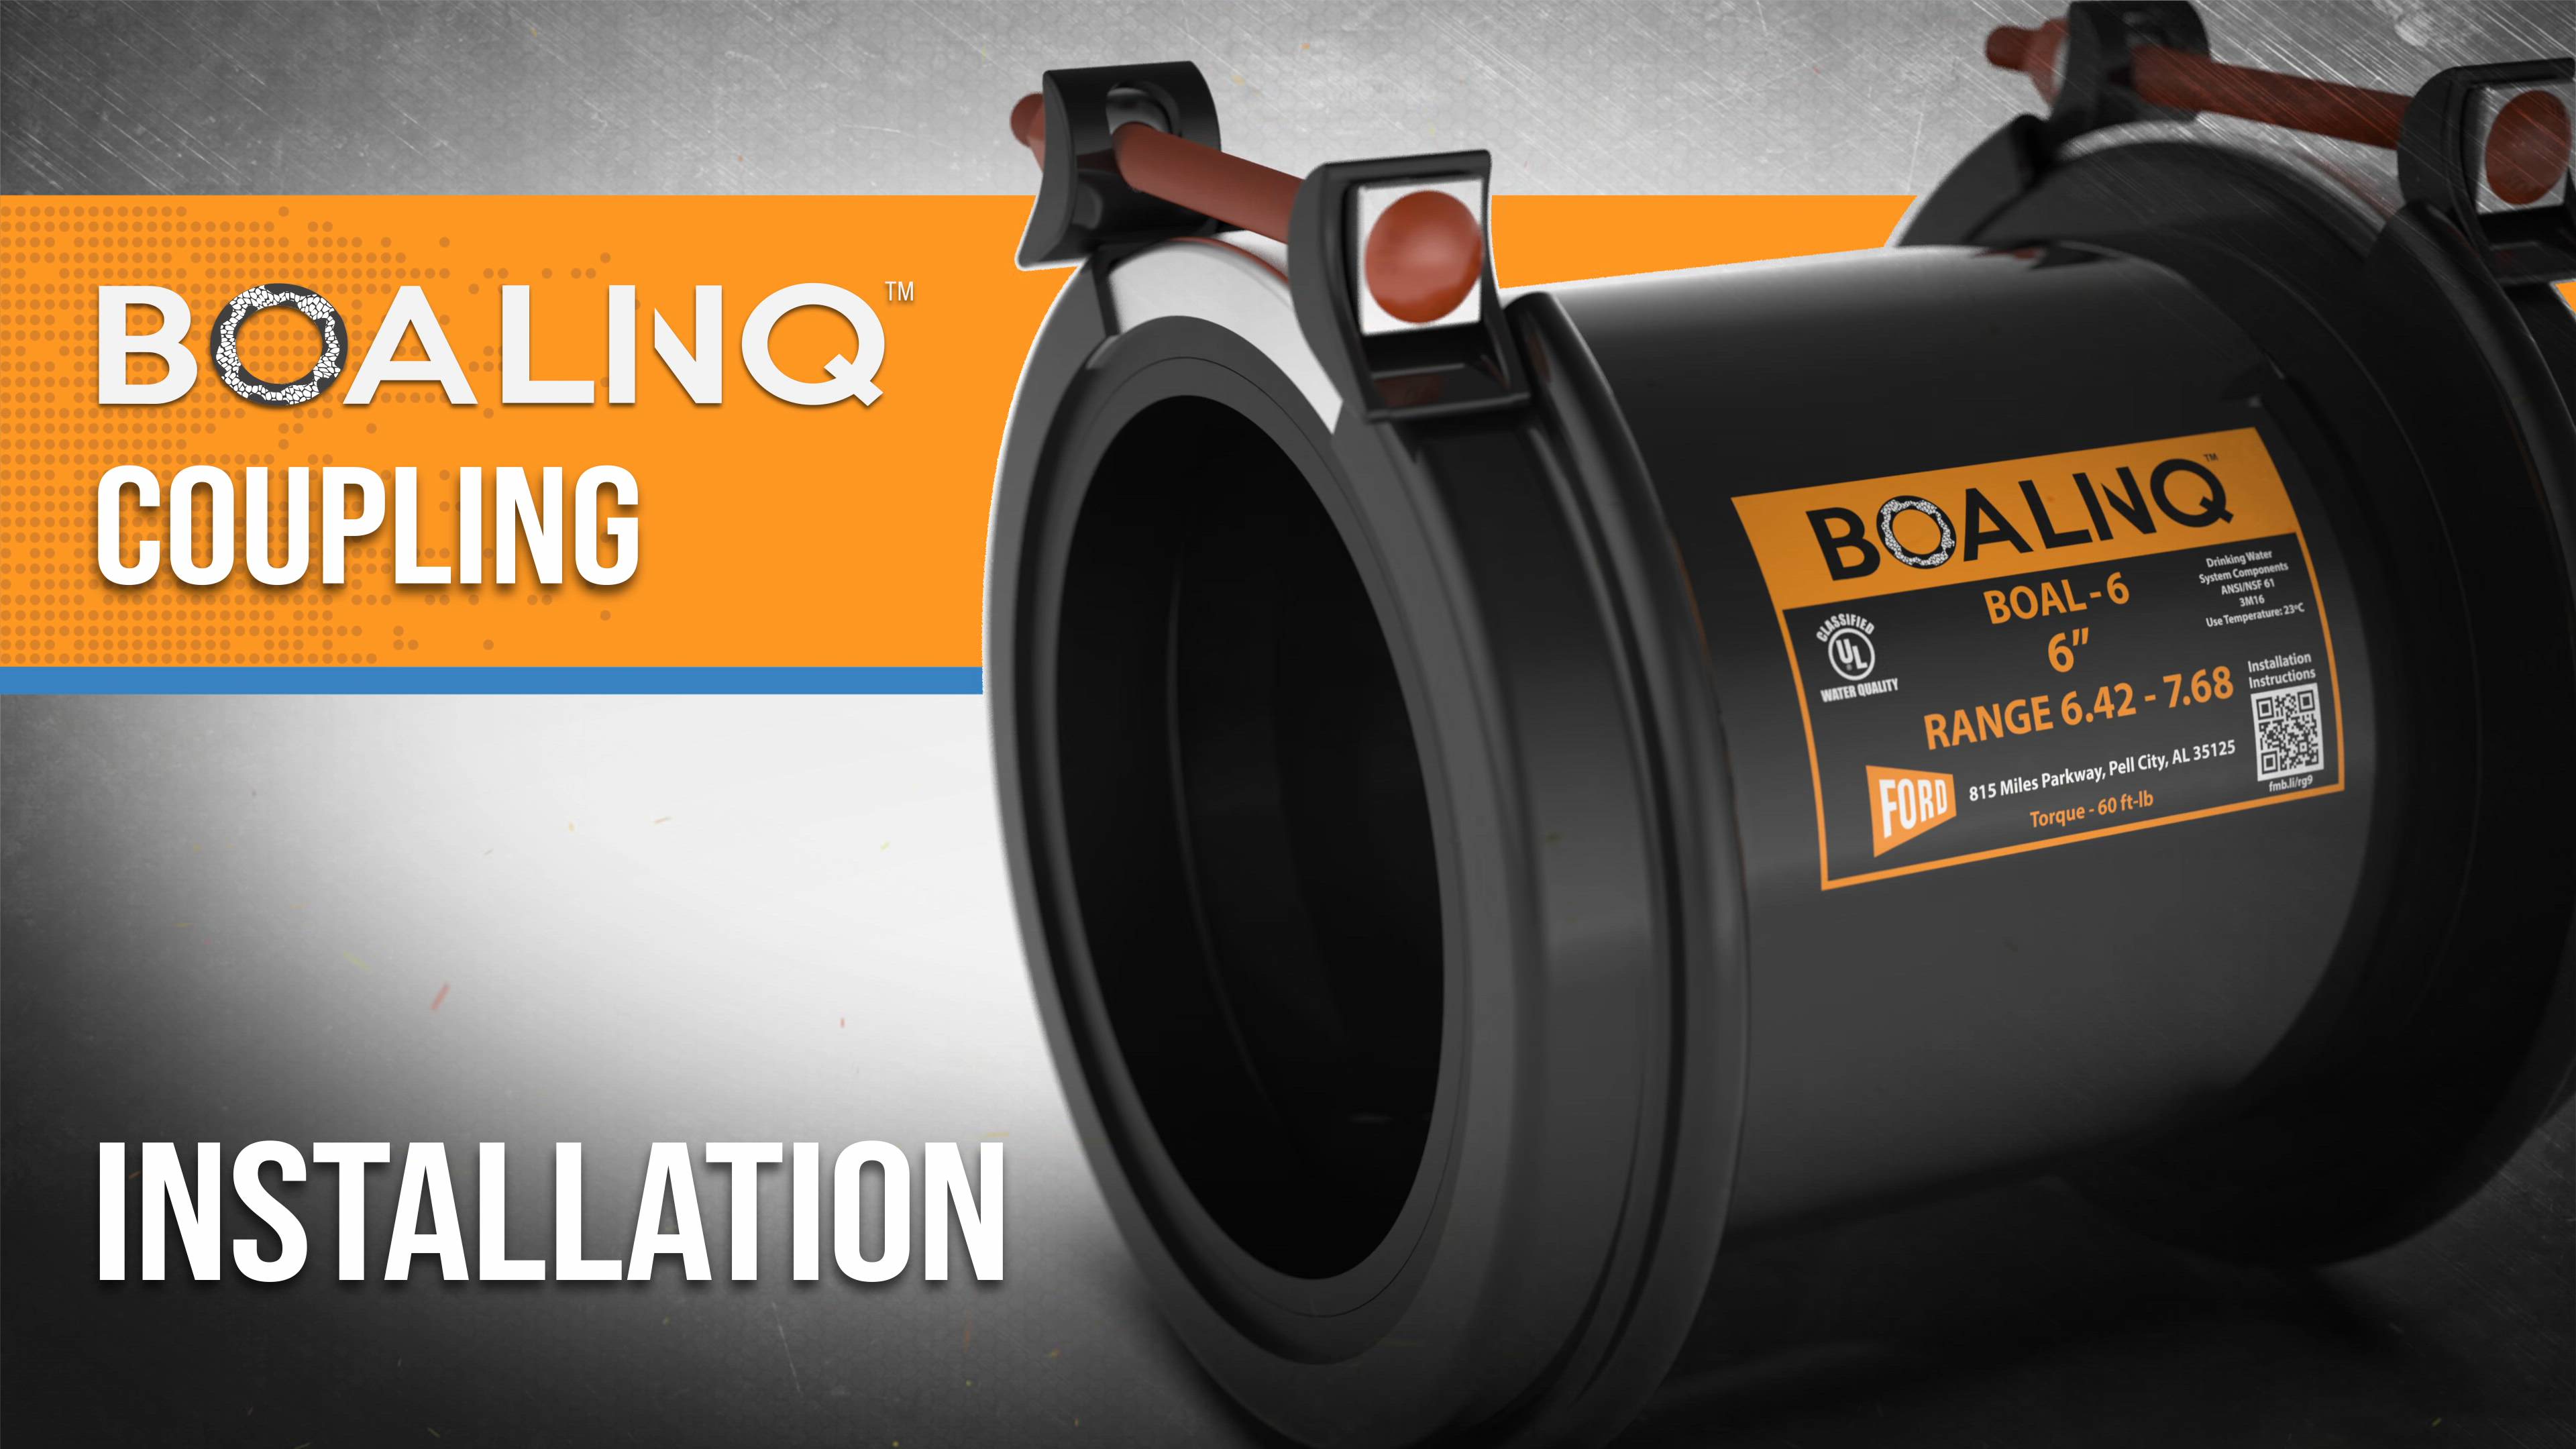 How to Install The BOALINQ™ Coupling